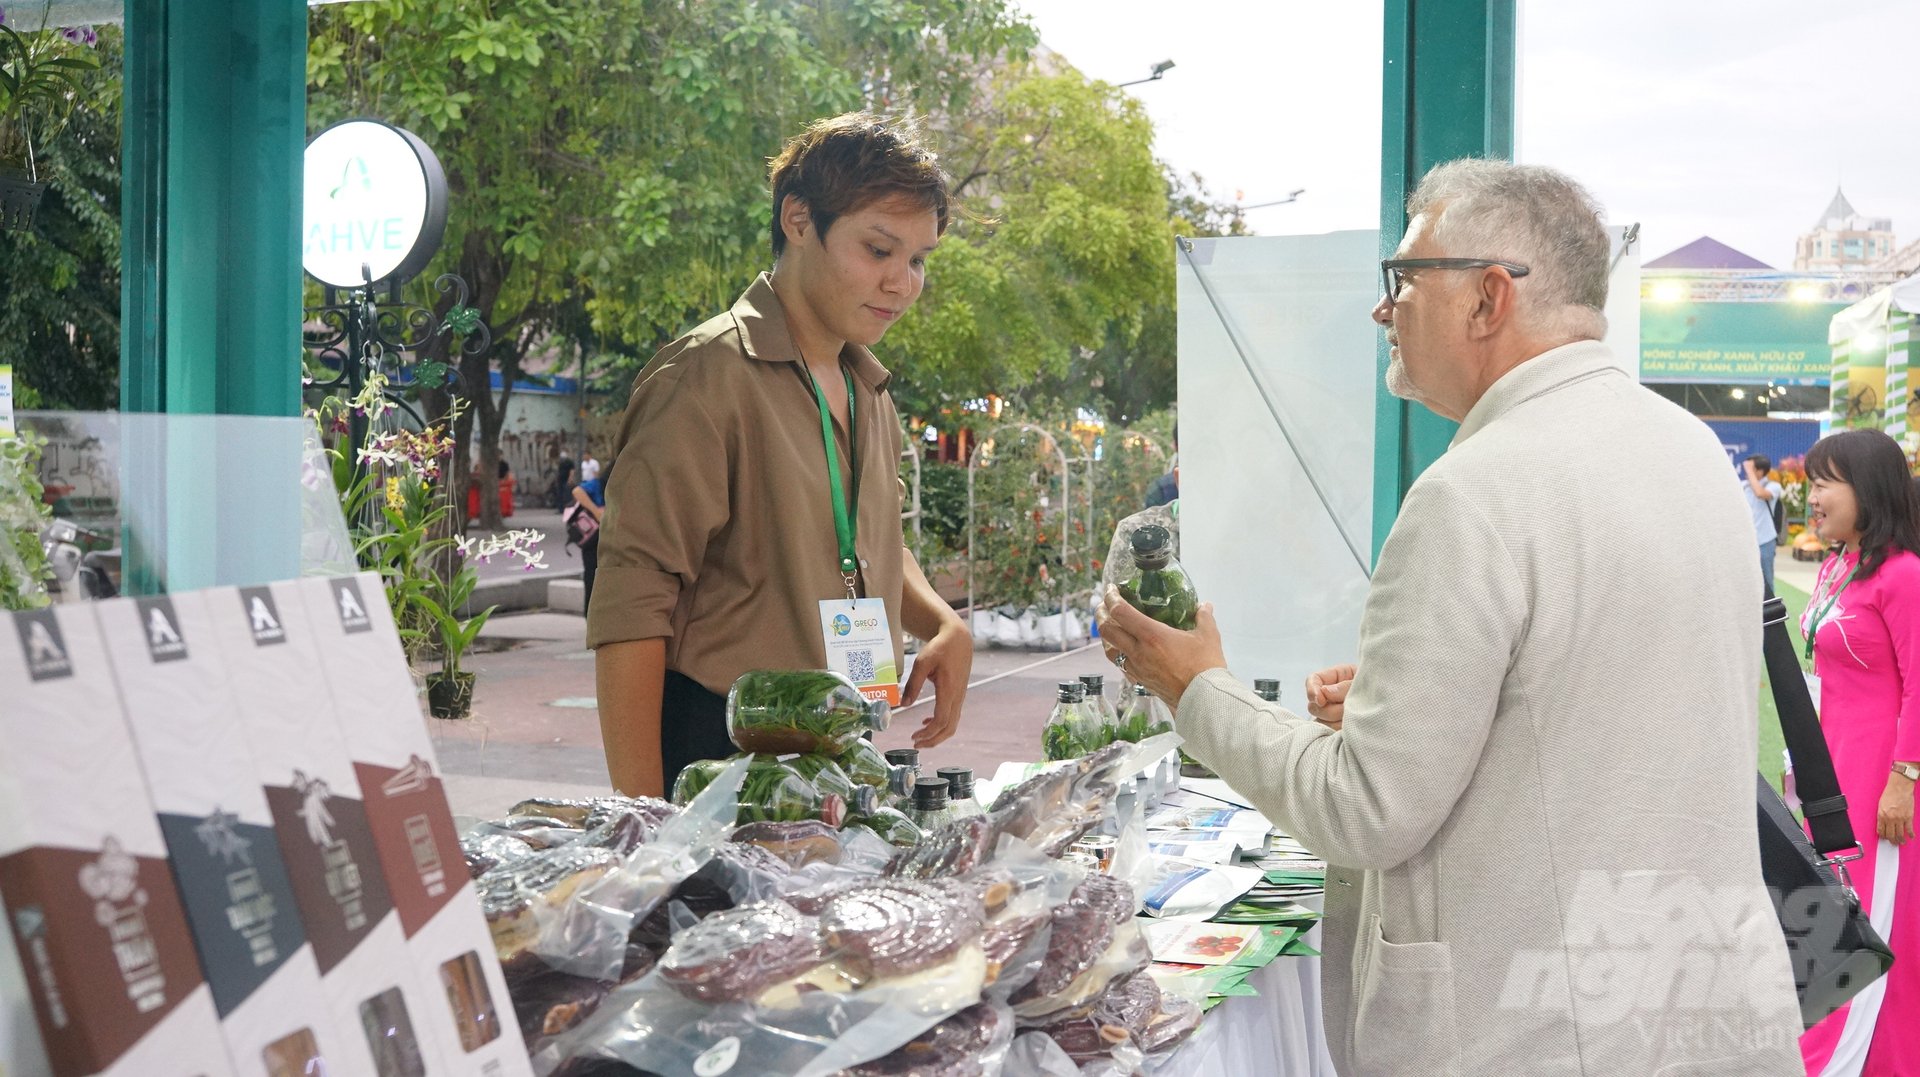 International buyers learn about Ho Chi Minh City's agricultural products. Photo: Nguyen Thuy.